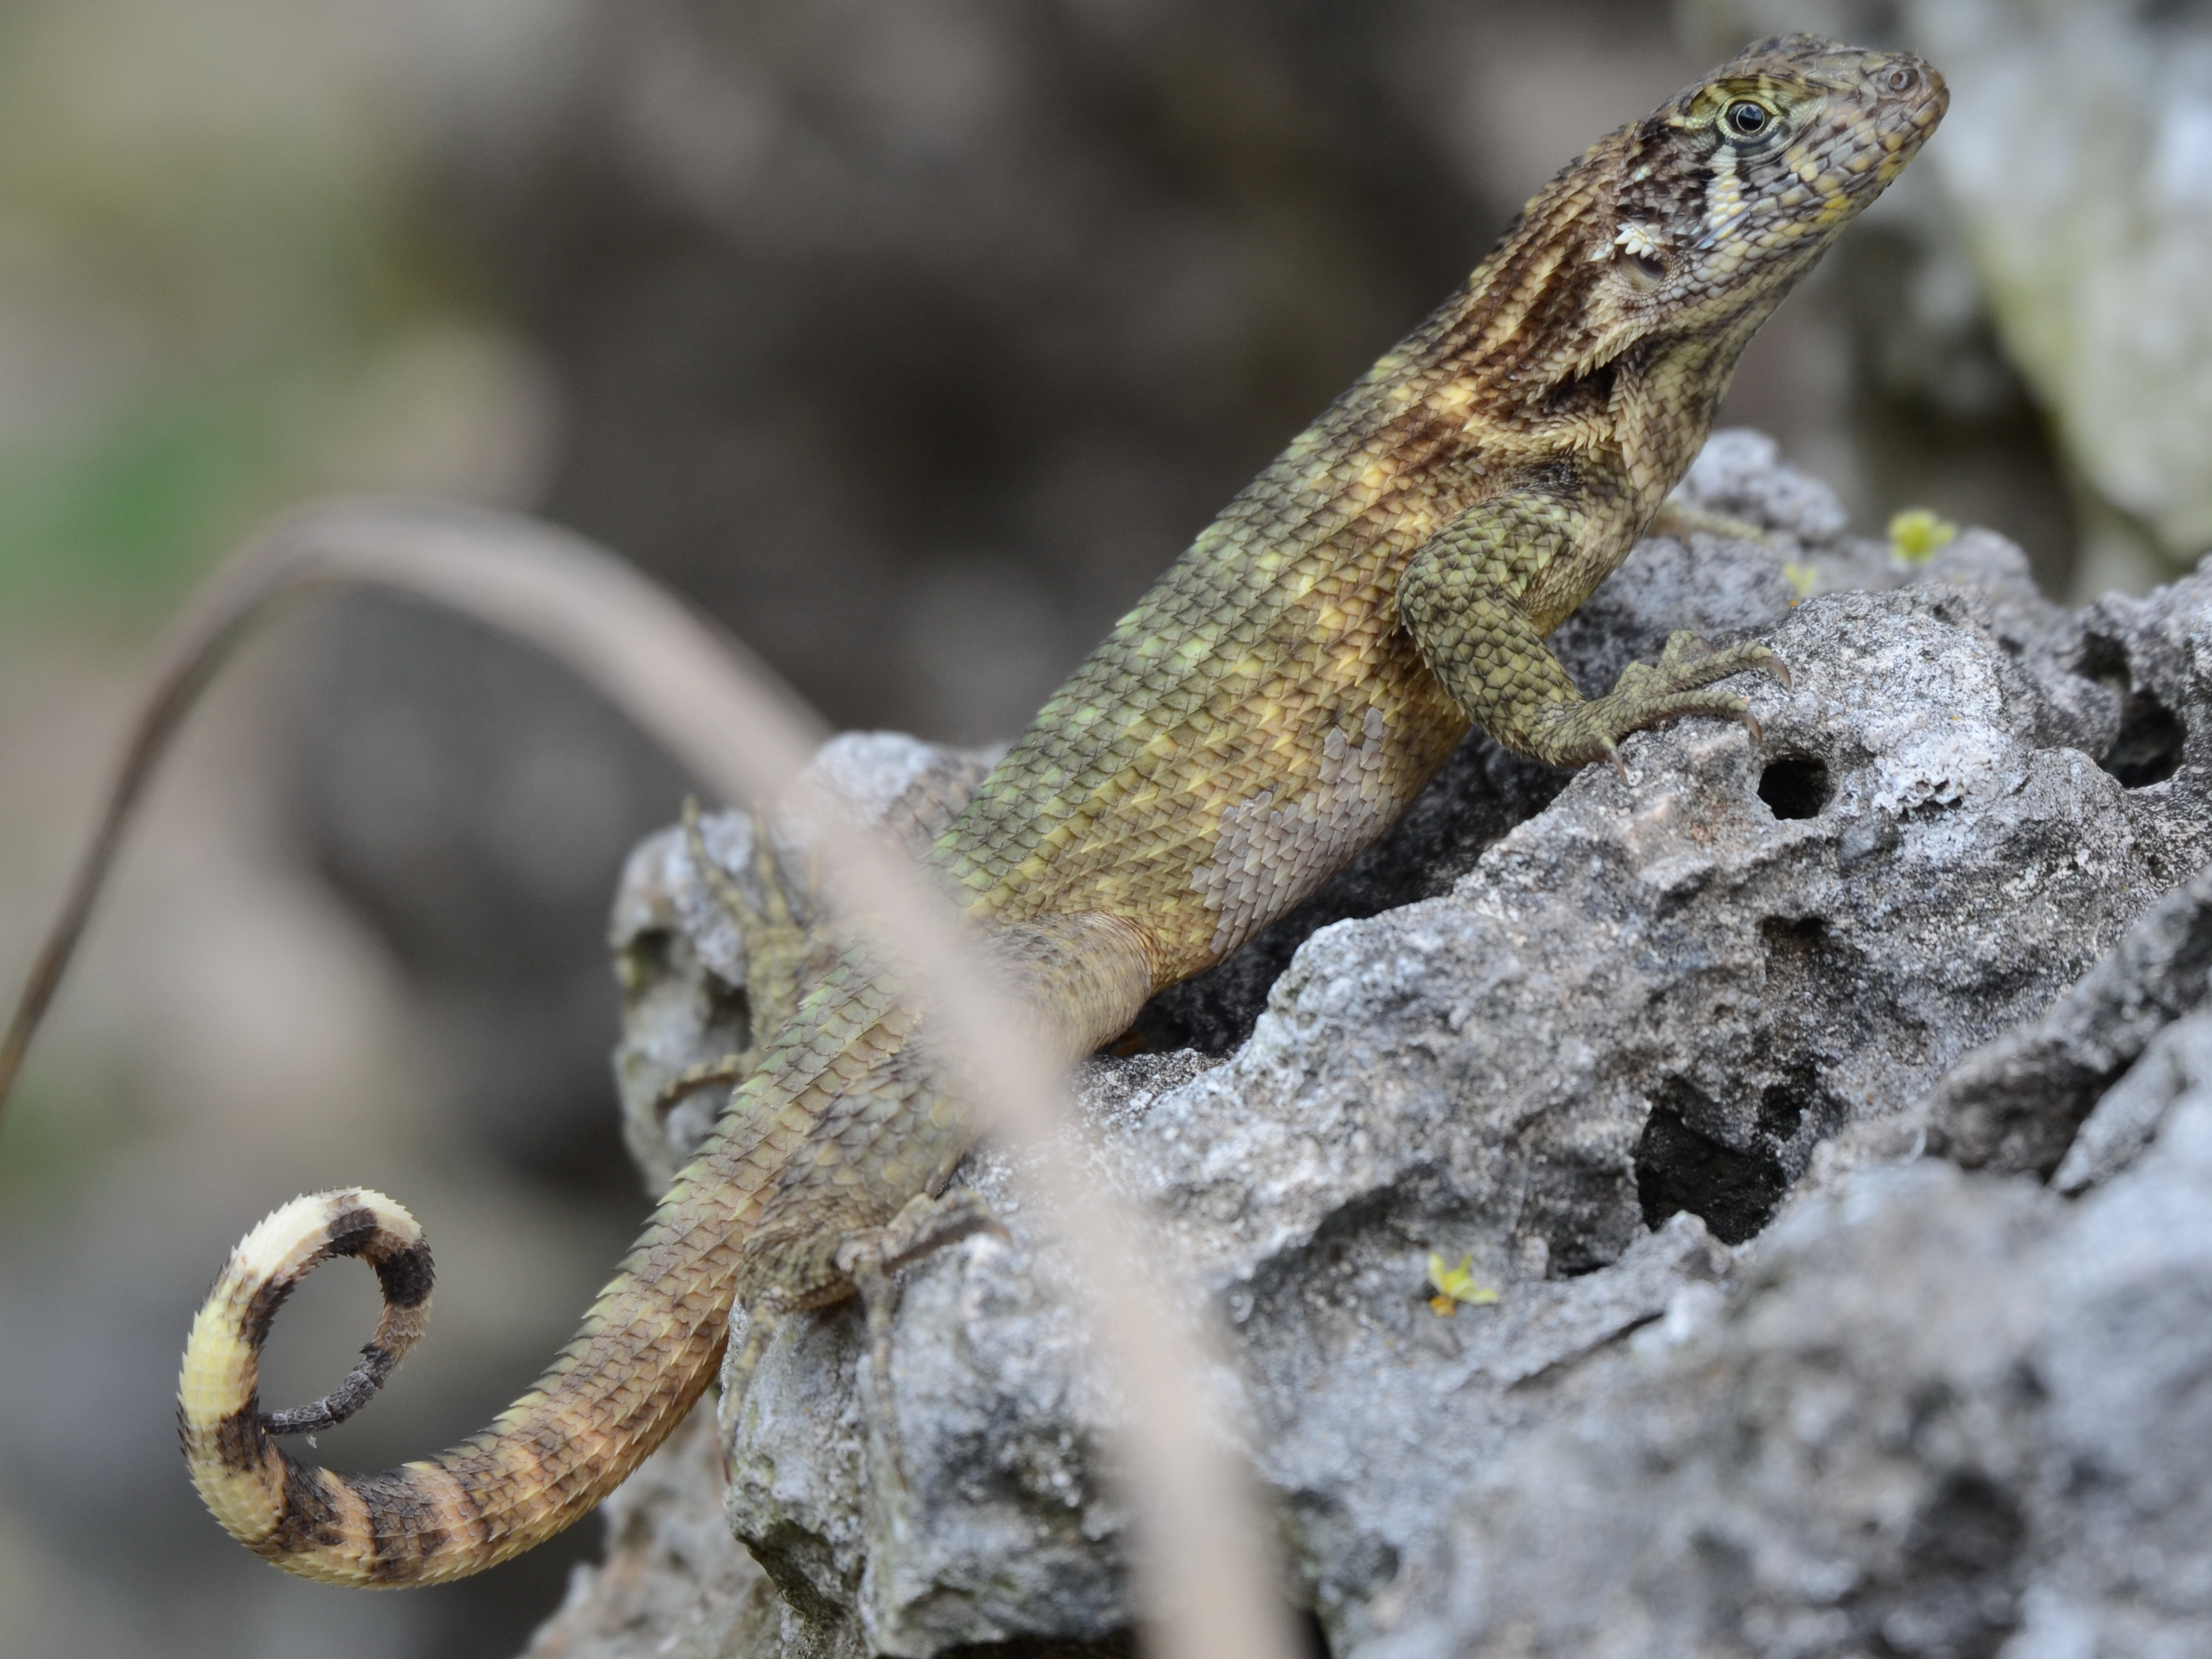 Click picture to see more Lizards.